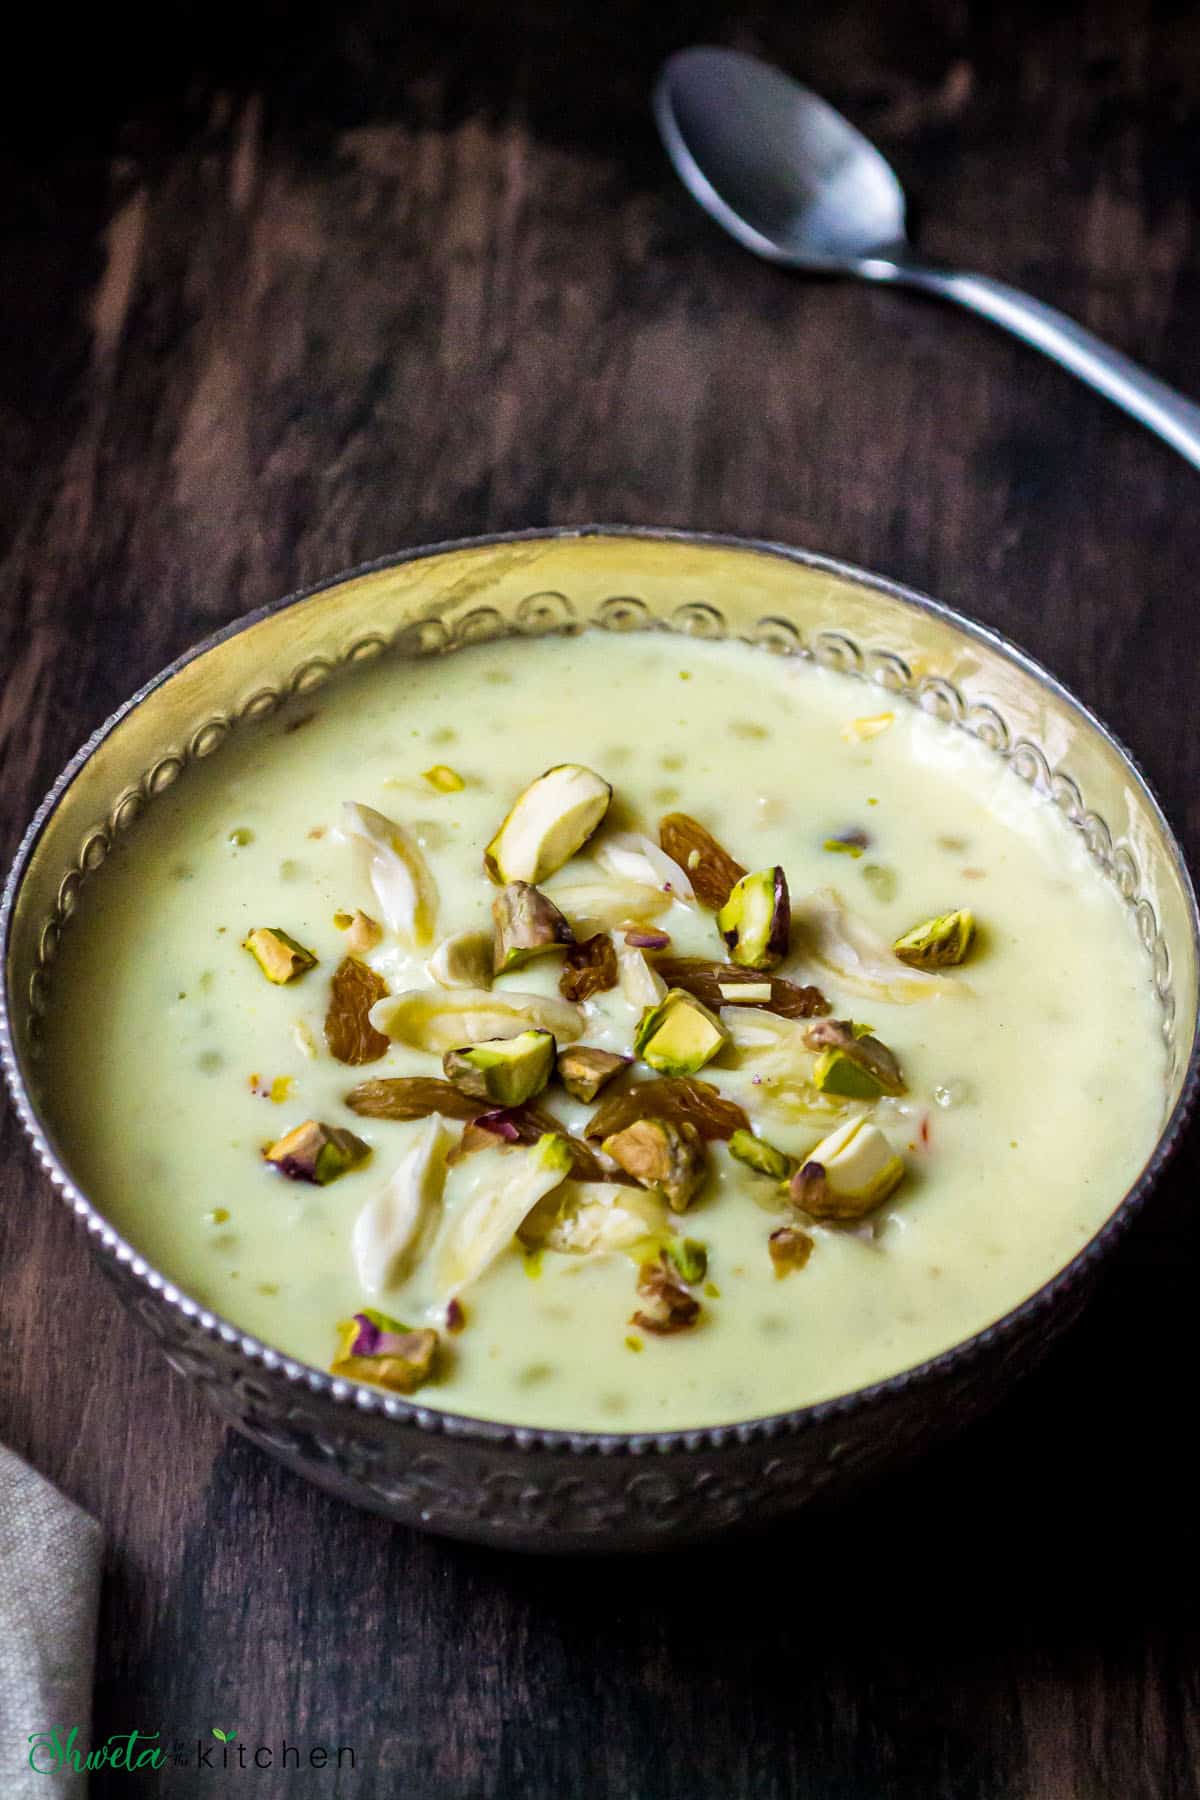 Sabudana kheer served in a silver bowl and topped with chopped nuts